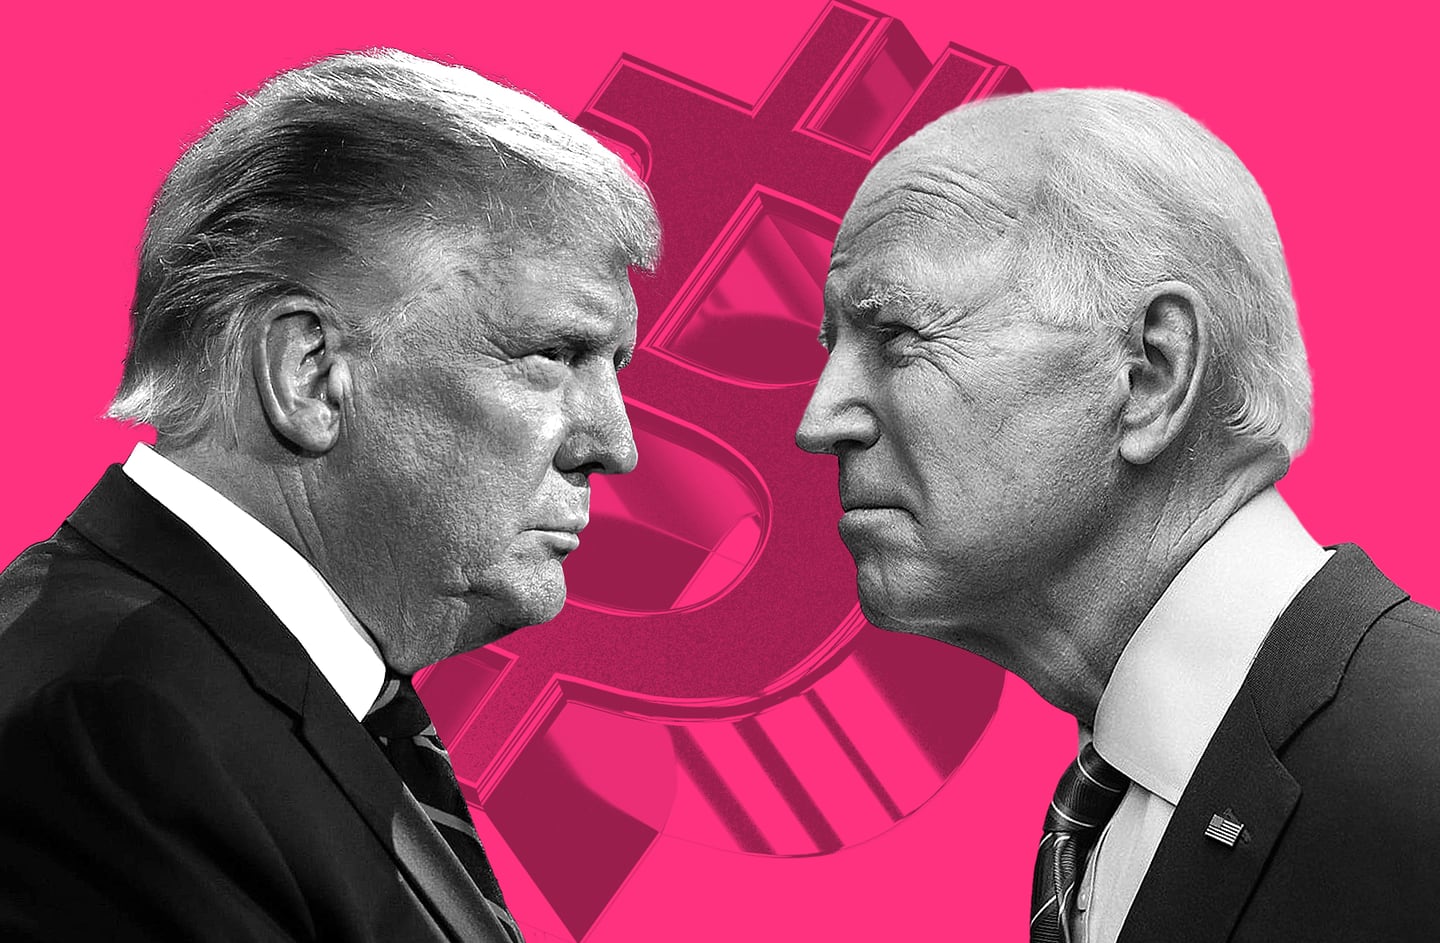 illustration of Trump and Biden facing each other with bitcoin logo behind